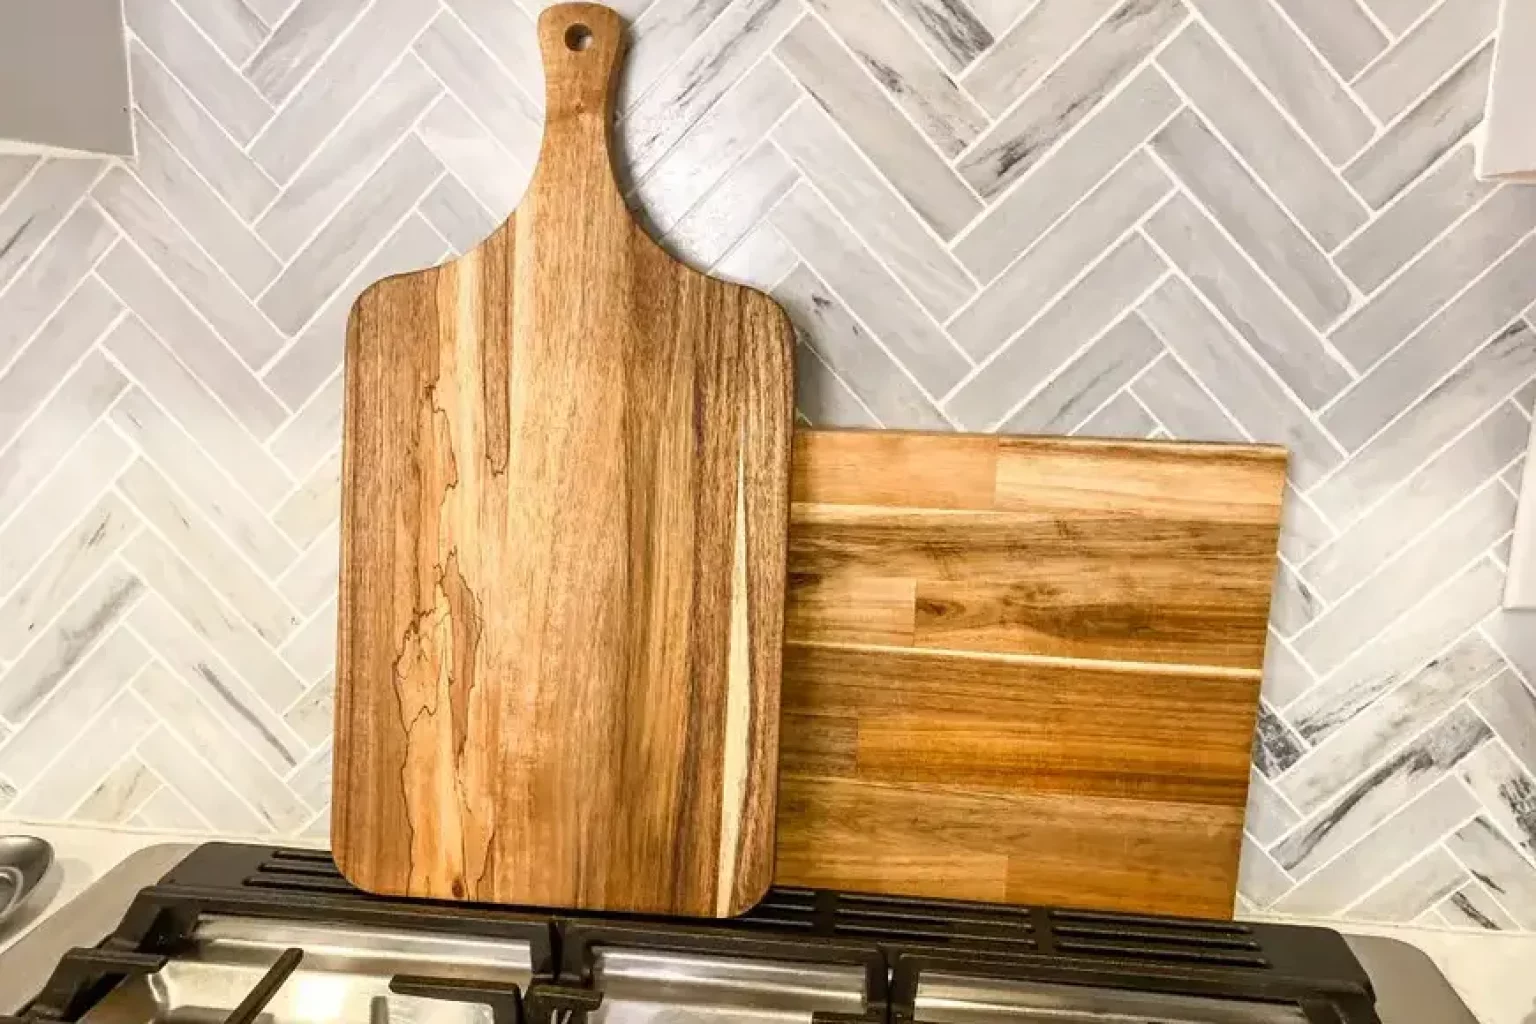 How to Display Cutting Boards in the Kitchen